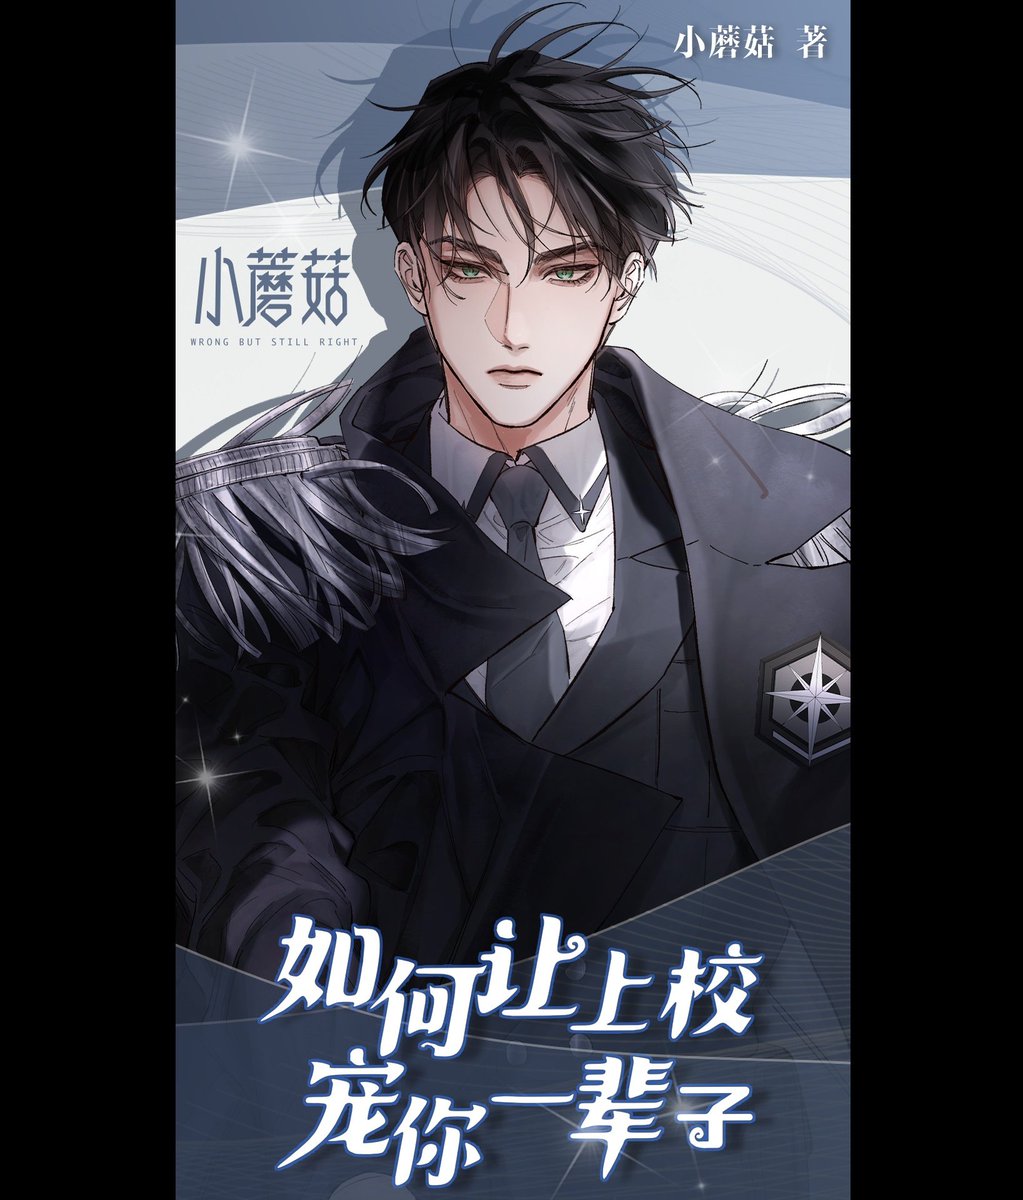 The Little Mushroom #小蘑菇 manhua team released an announcement that a top secret document from the Base has been leaked!

Turns out the 'document' is called 'How to Make the Colonel Pamper You Forever' featuring a dashing photo of Lu Feng on the cover 😂

Love their humor sm 😂